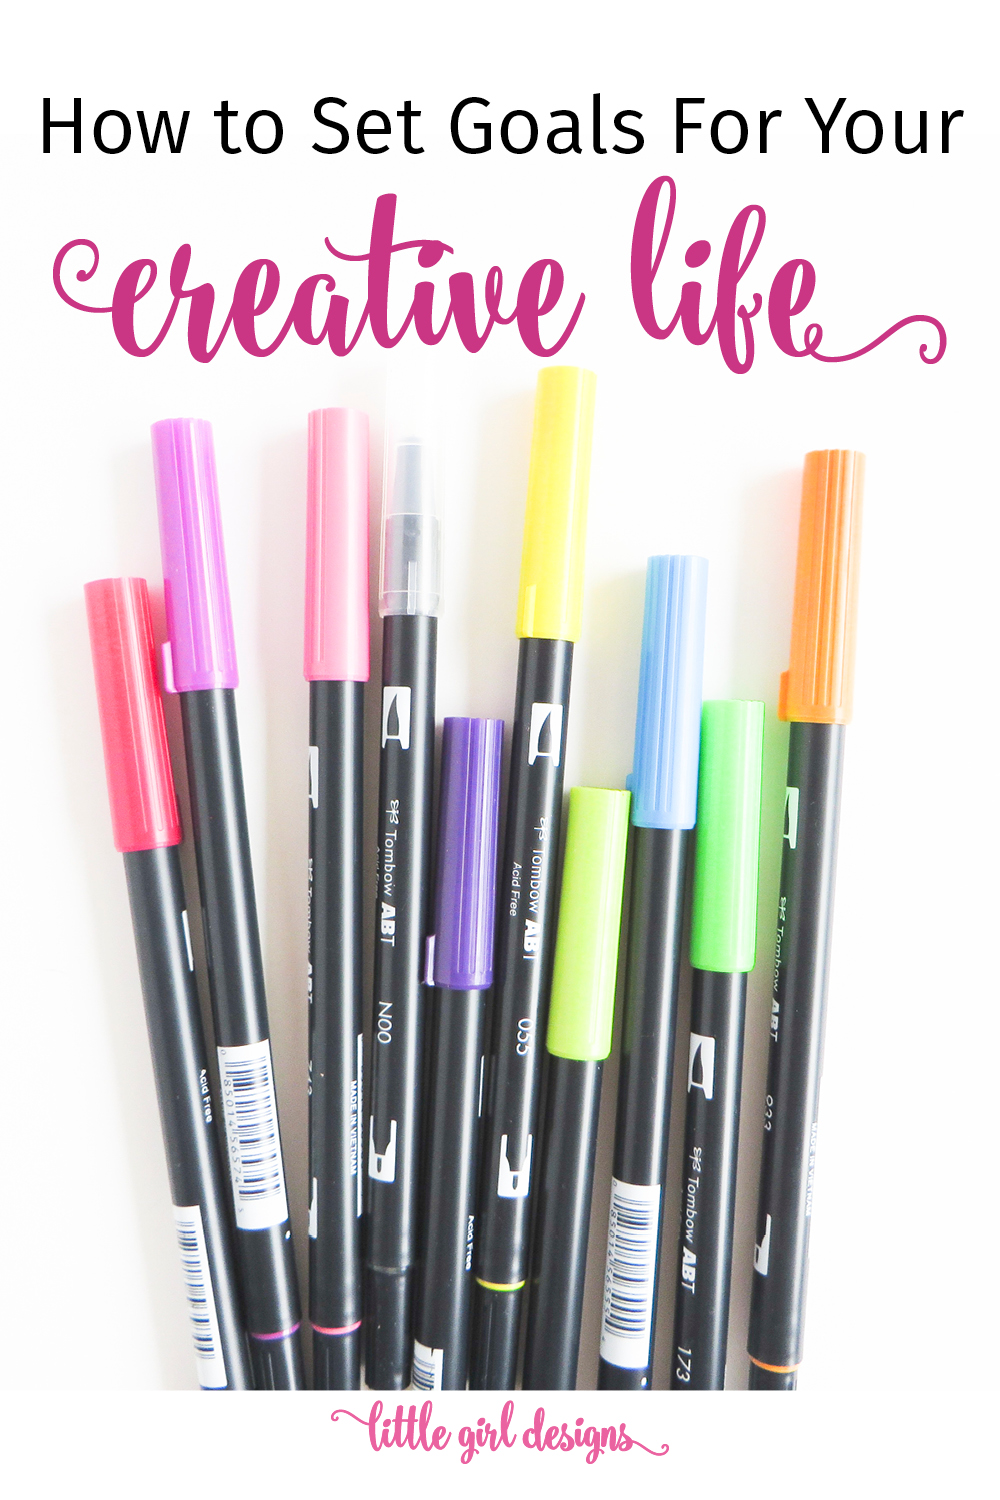 Have you ever set creative goals for your life? Here are some tips for getting started! (P.S. Creative goals are FUN!)